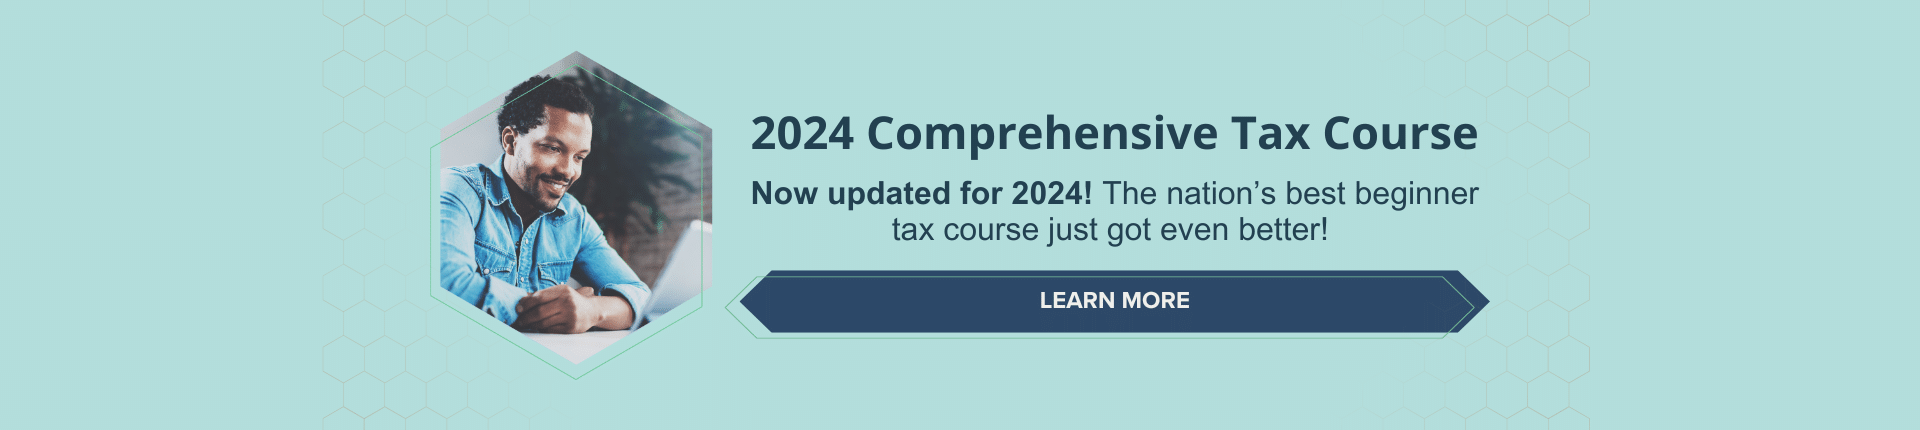 Comprehensive Tax Course now updated for 2024!